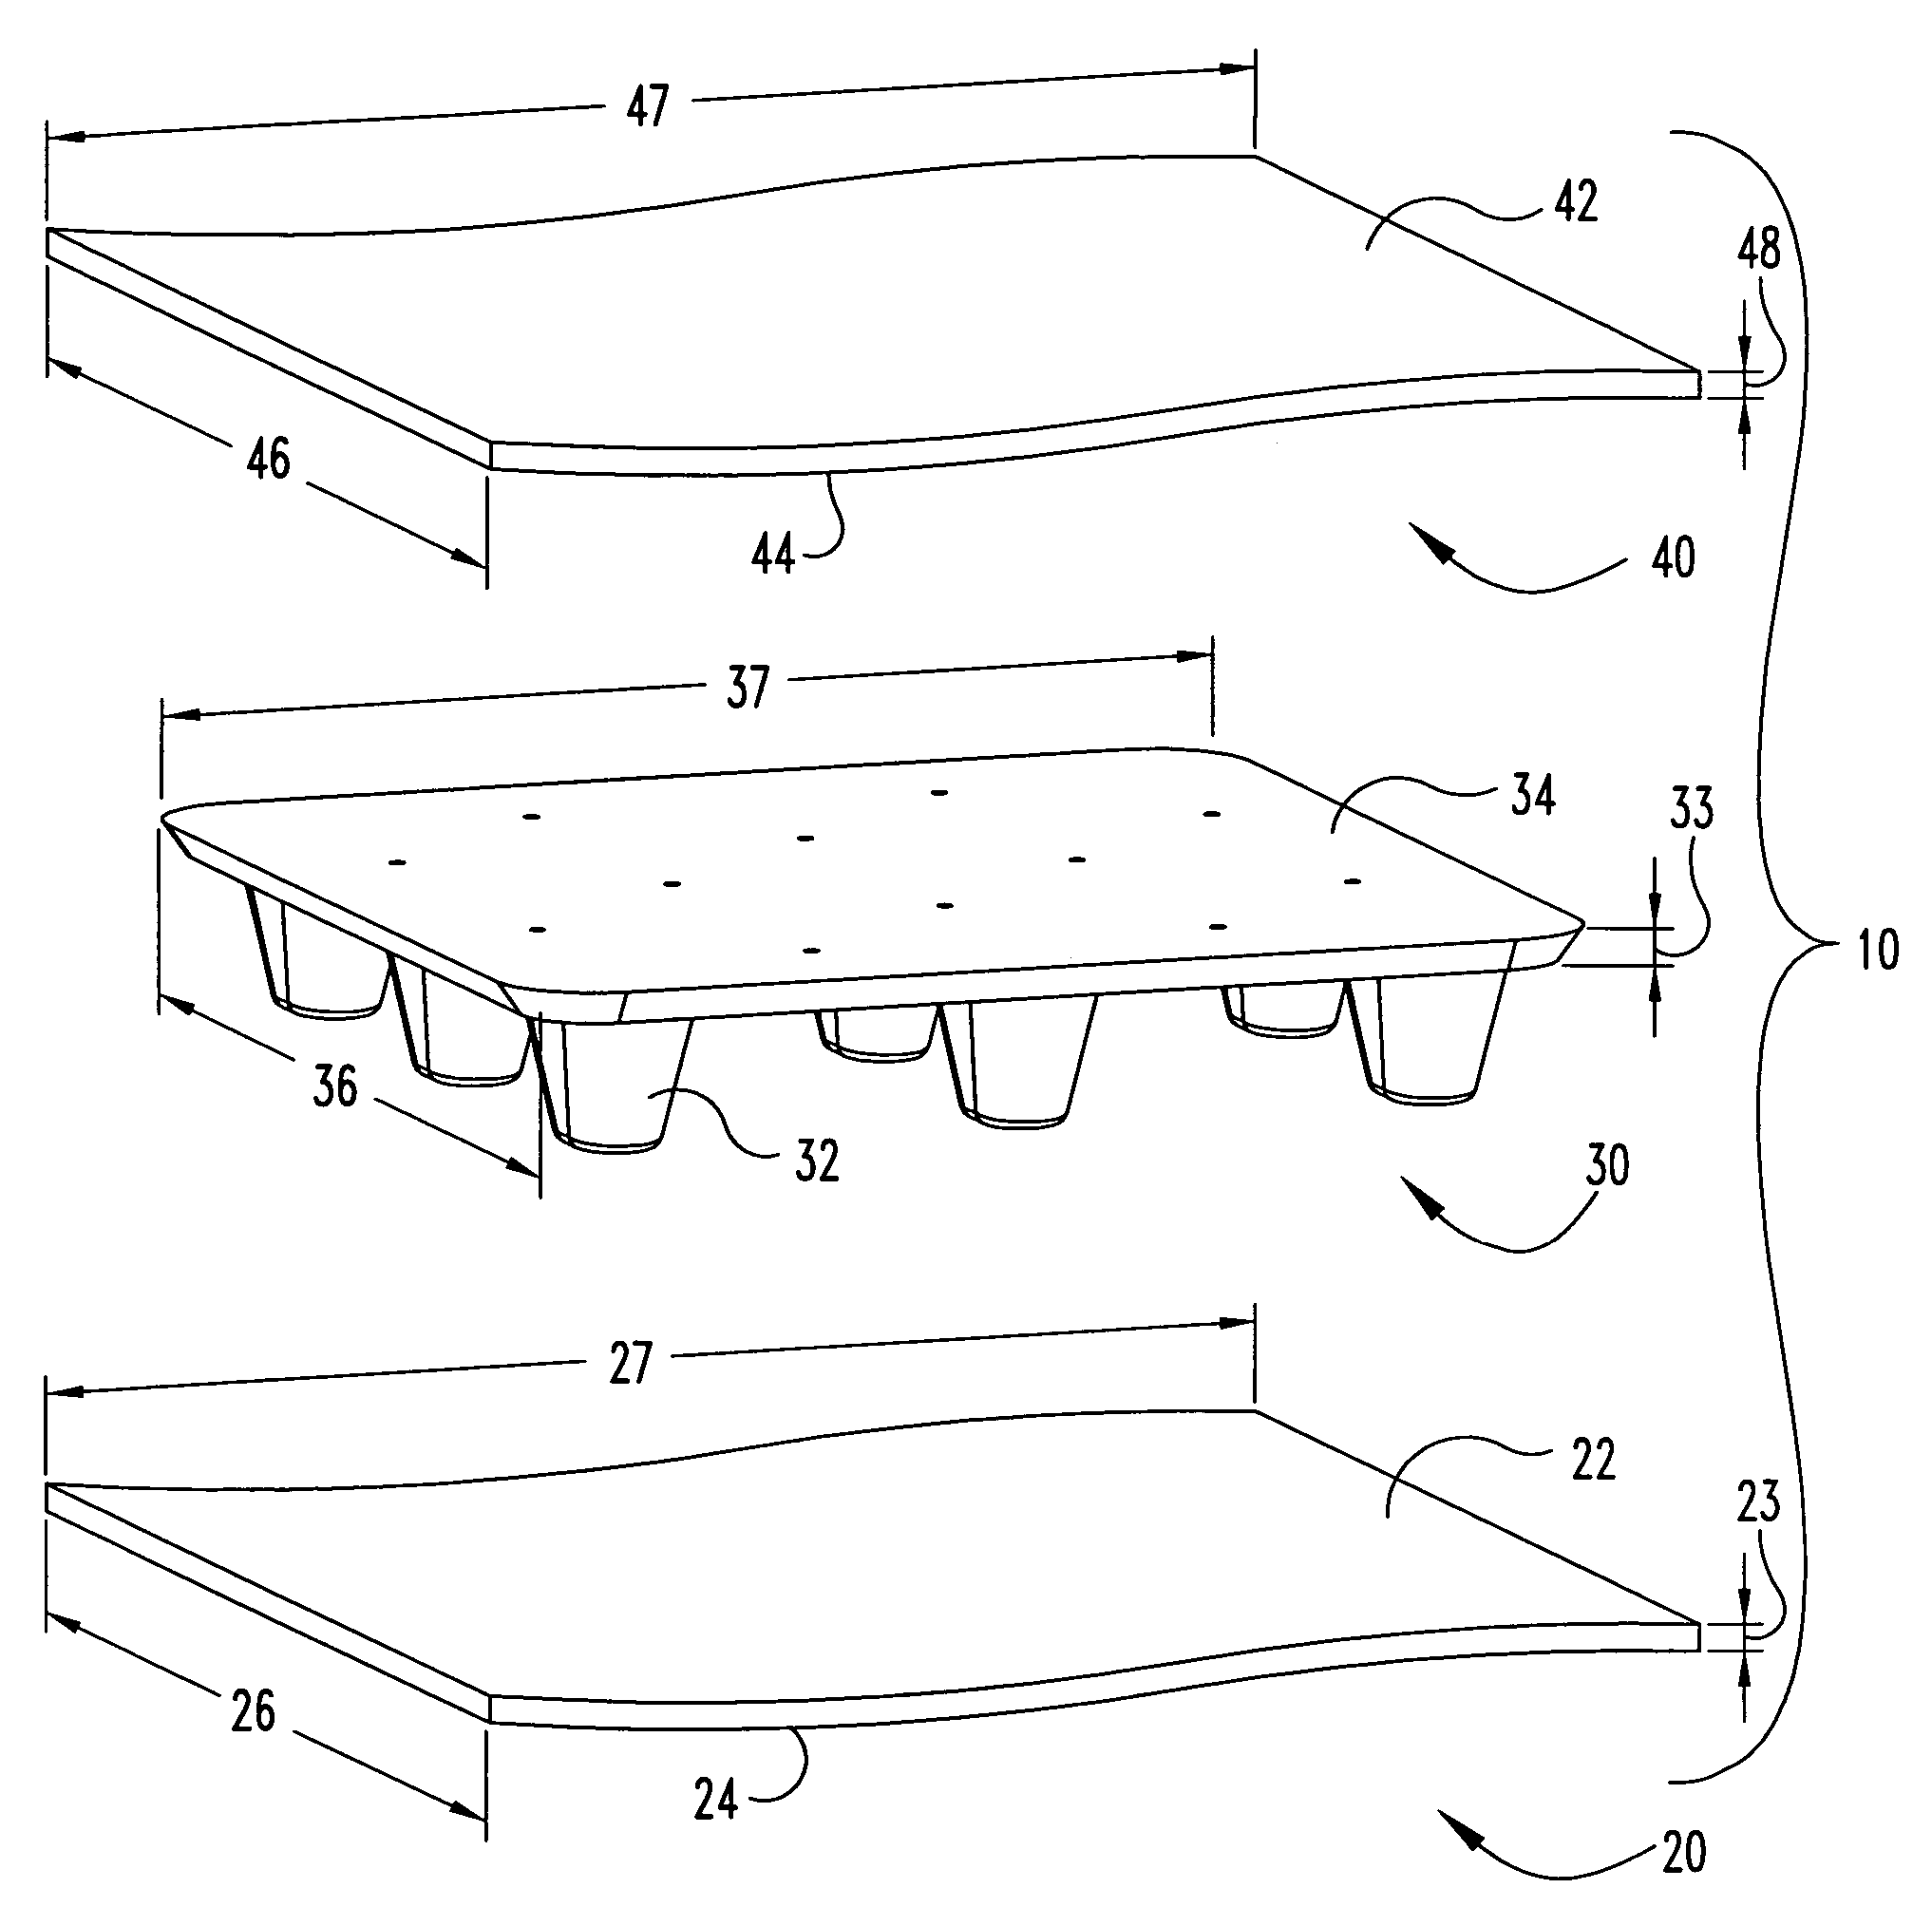 Method of molding load-bearing articles from compressible cores and heat malleable coverings